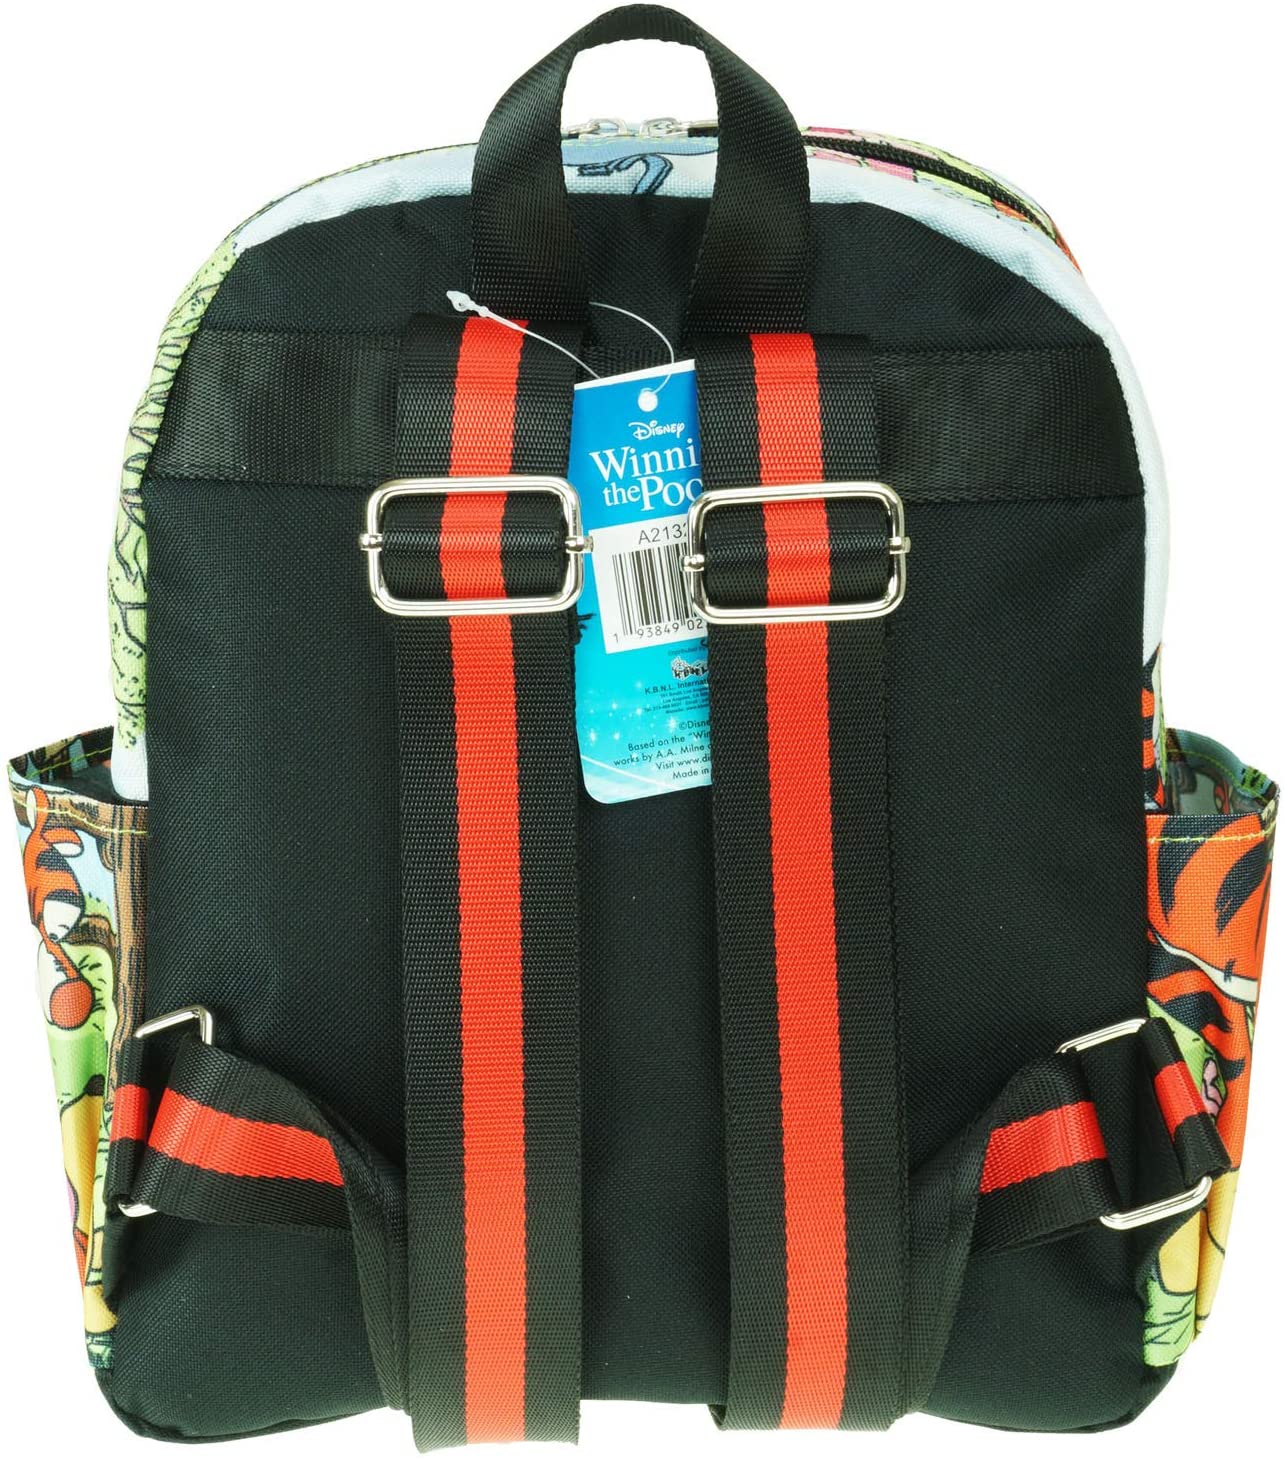 Tigger 12" Deluxe Oversize Print Daypack - A21325 - GTE Zone